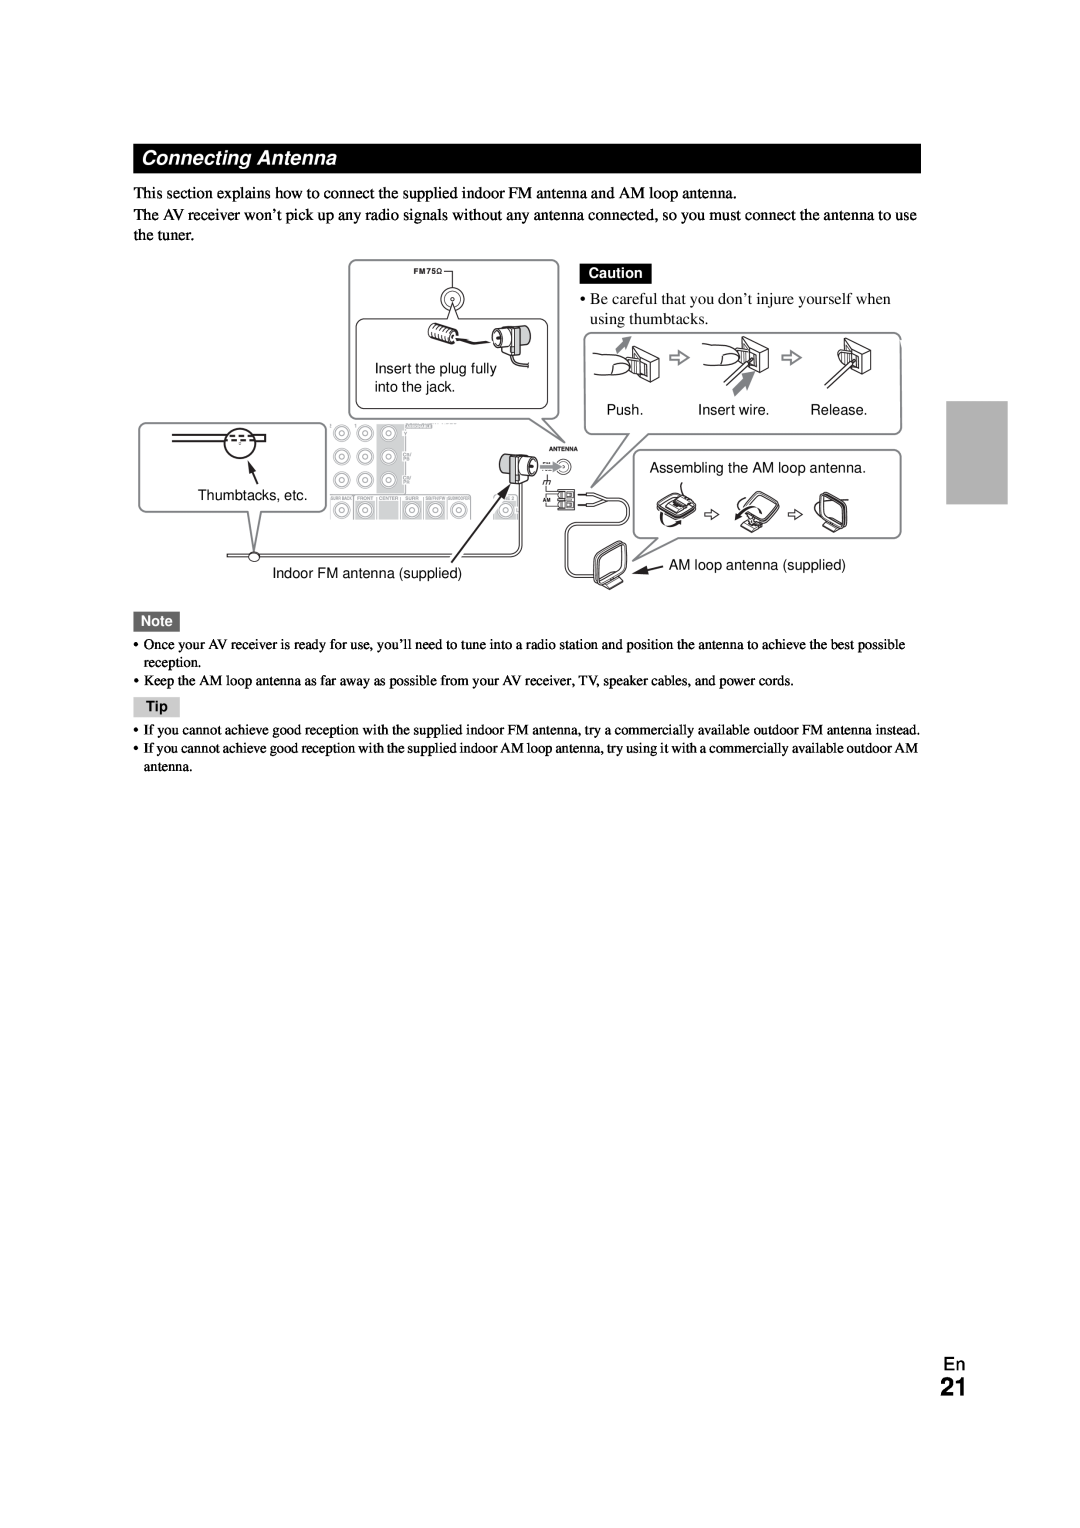 Onkyo HT-RC270 instruction manual Connecting Antenna, Insert the plug fully into the jack, Push, Insert wire, Release 